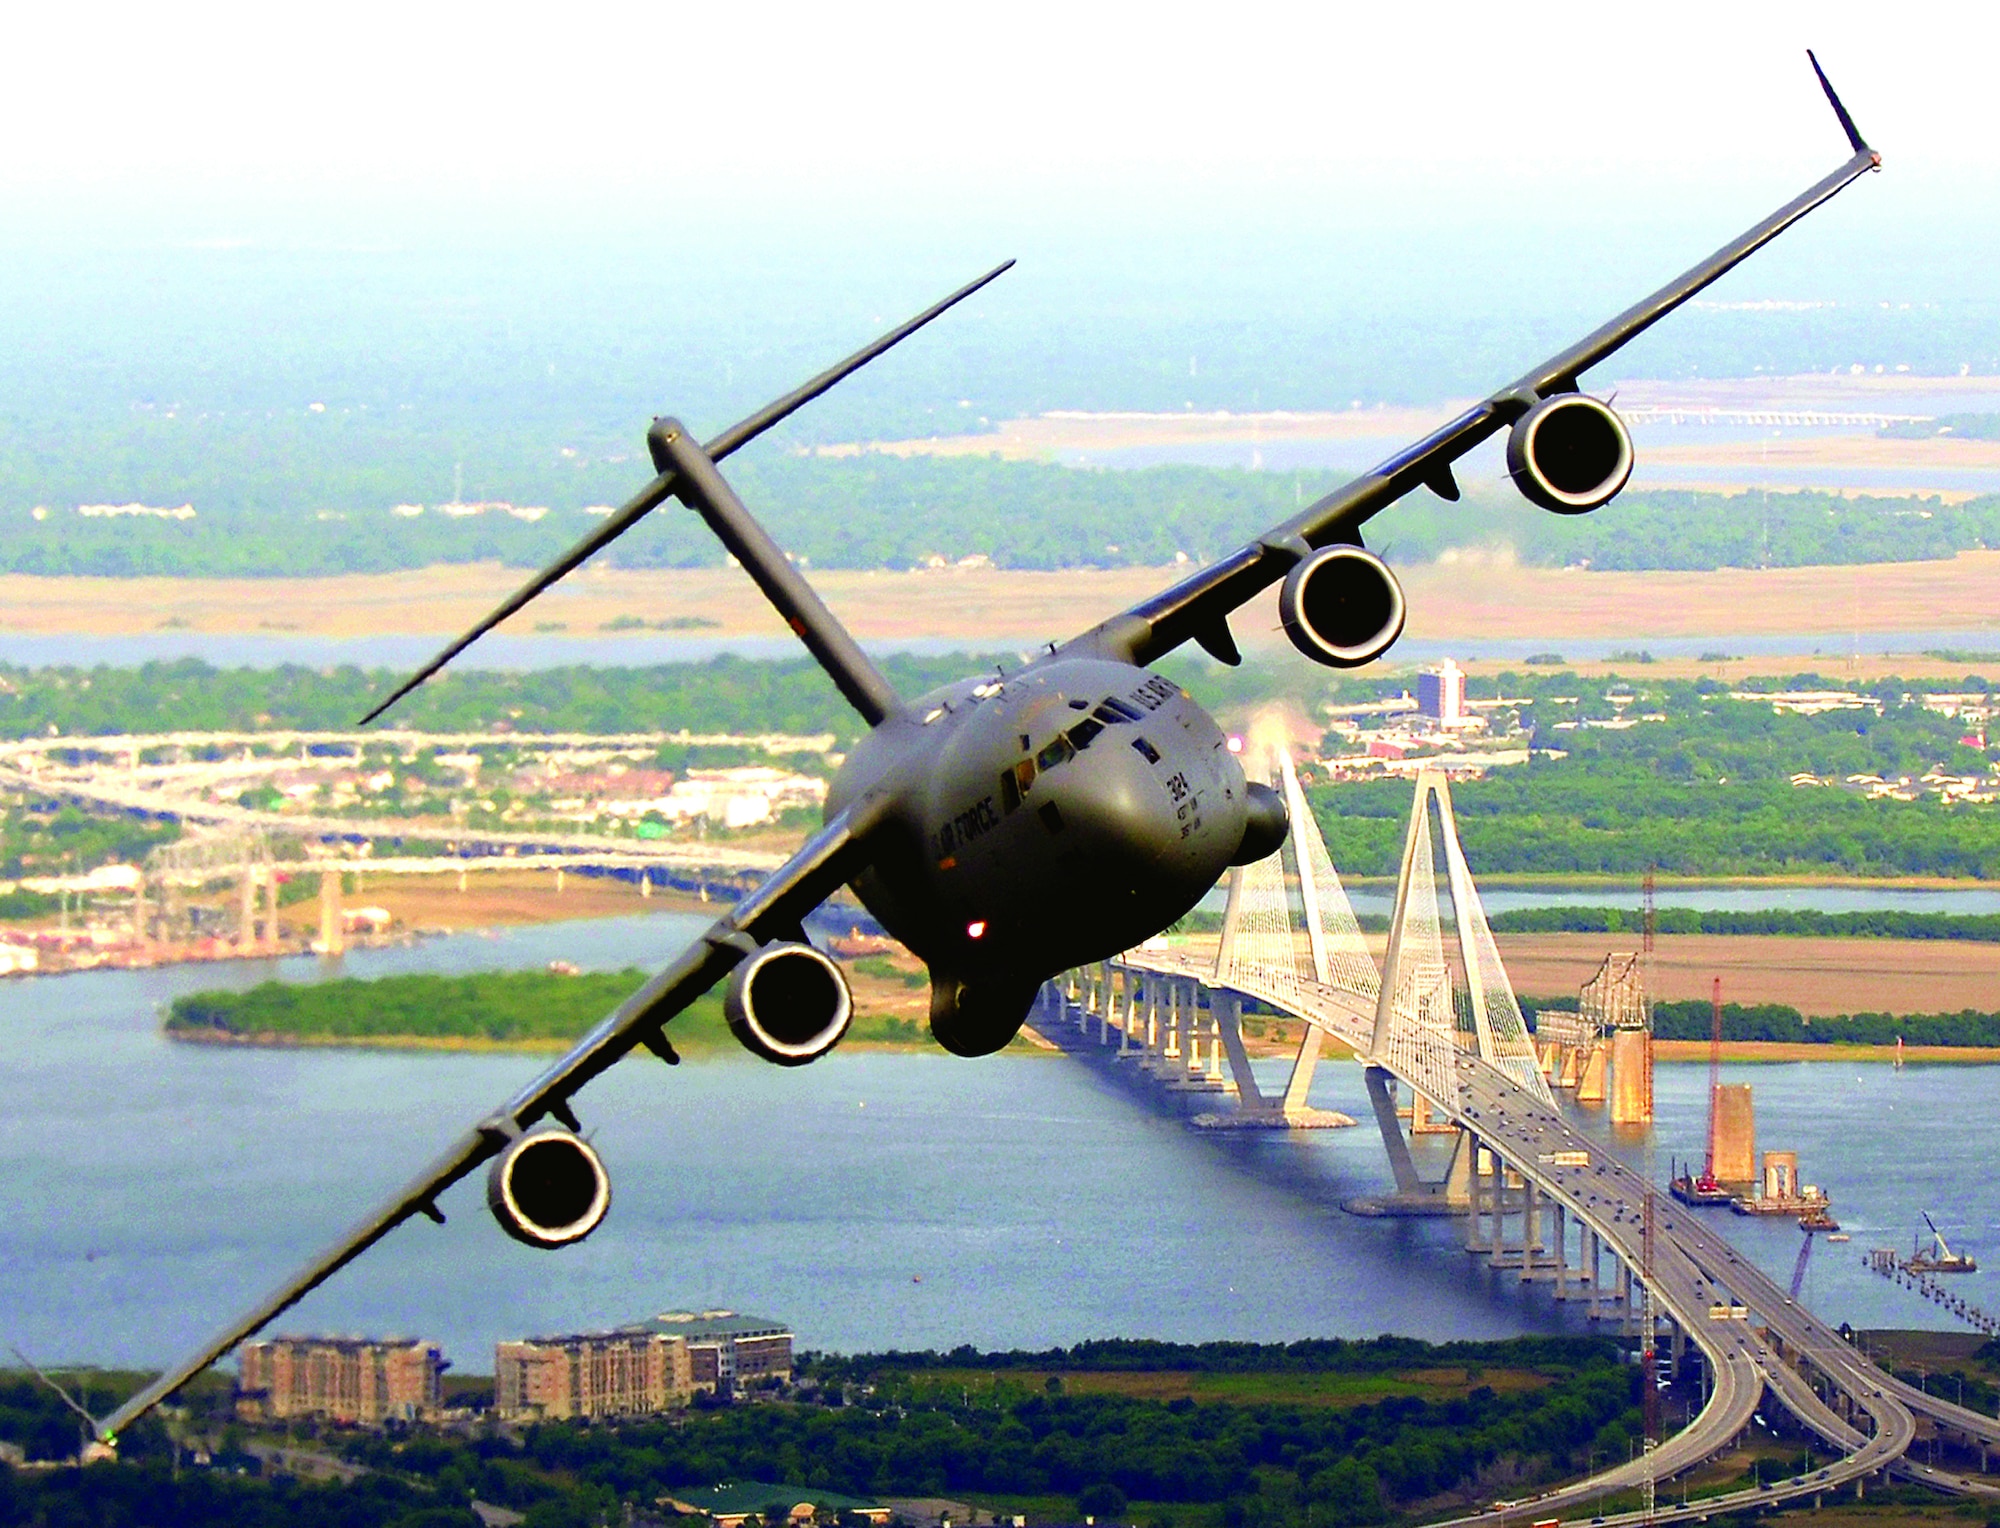 A C-17 Globemaster III from the 14th Airlift Squadron, Charleston Air Force Base, S.C., banks over the Arthur J. Ravenel Bridge in Charleston, S.C., during a training mission May 16, 2006. (U.S. Air Force photo/Tech. Sgt. Russell E. Cooley IV)